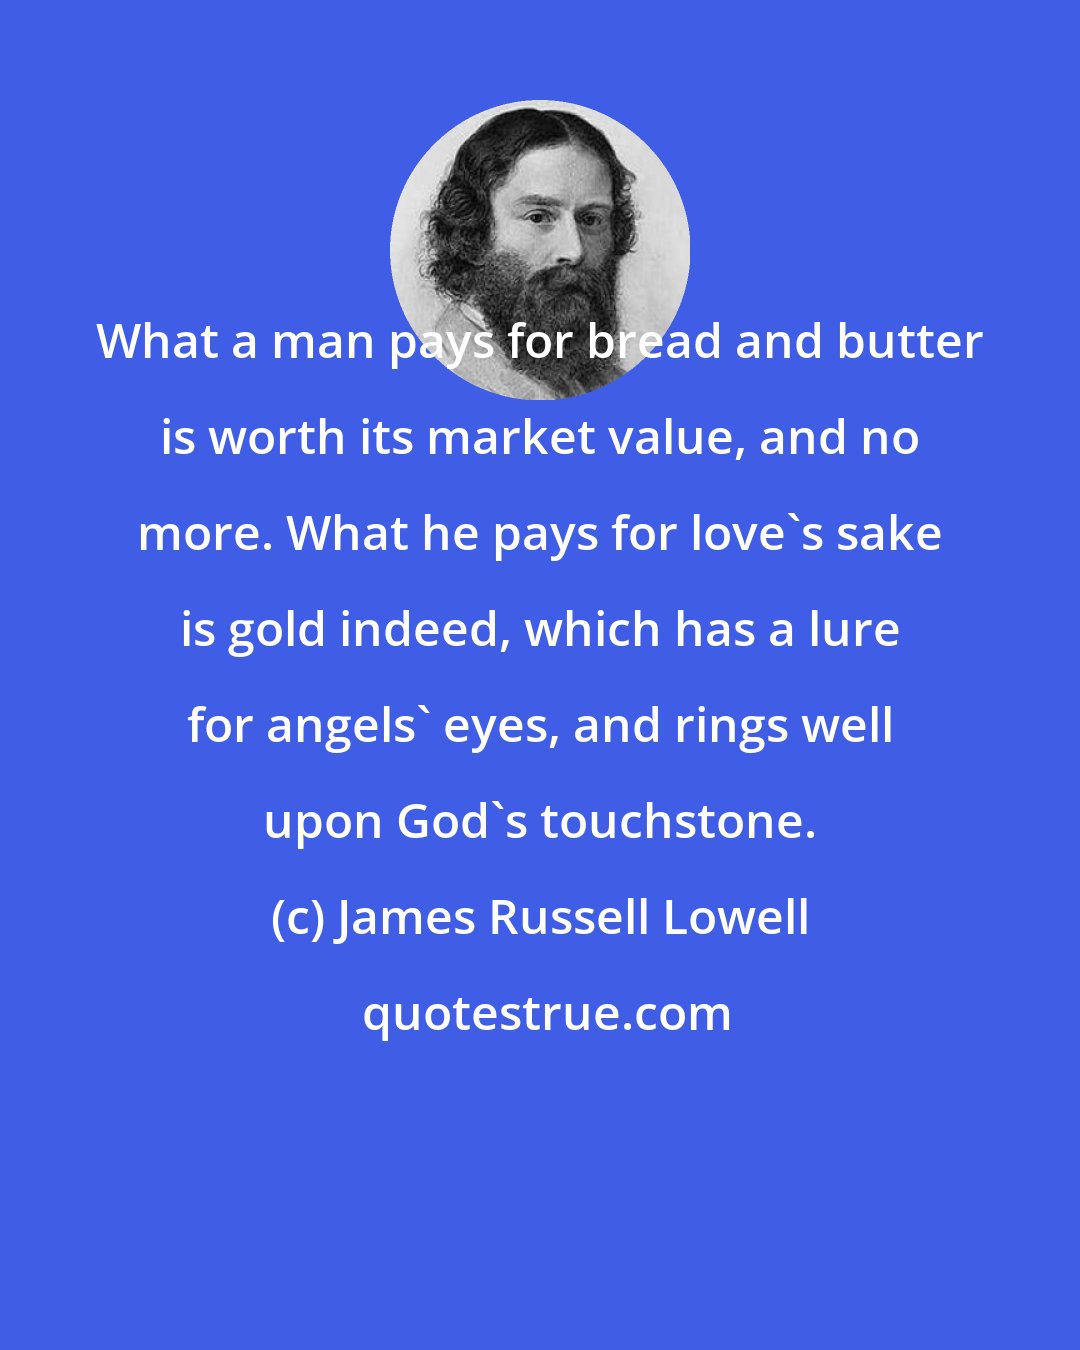 James Russell Lowell: What a man pays for bread and butter is worth its market value, and no more. What he pays for love's sake is gold indeed, which has a lure for angels' eyes, and rings well upon God's touchstone.